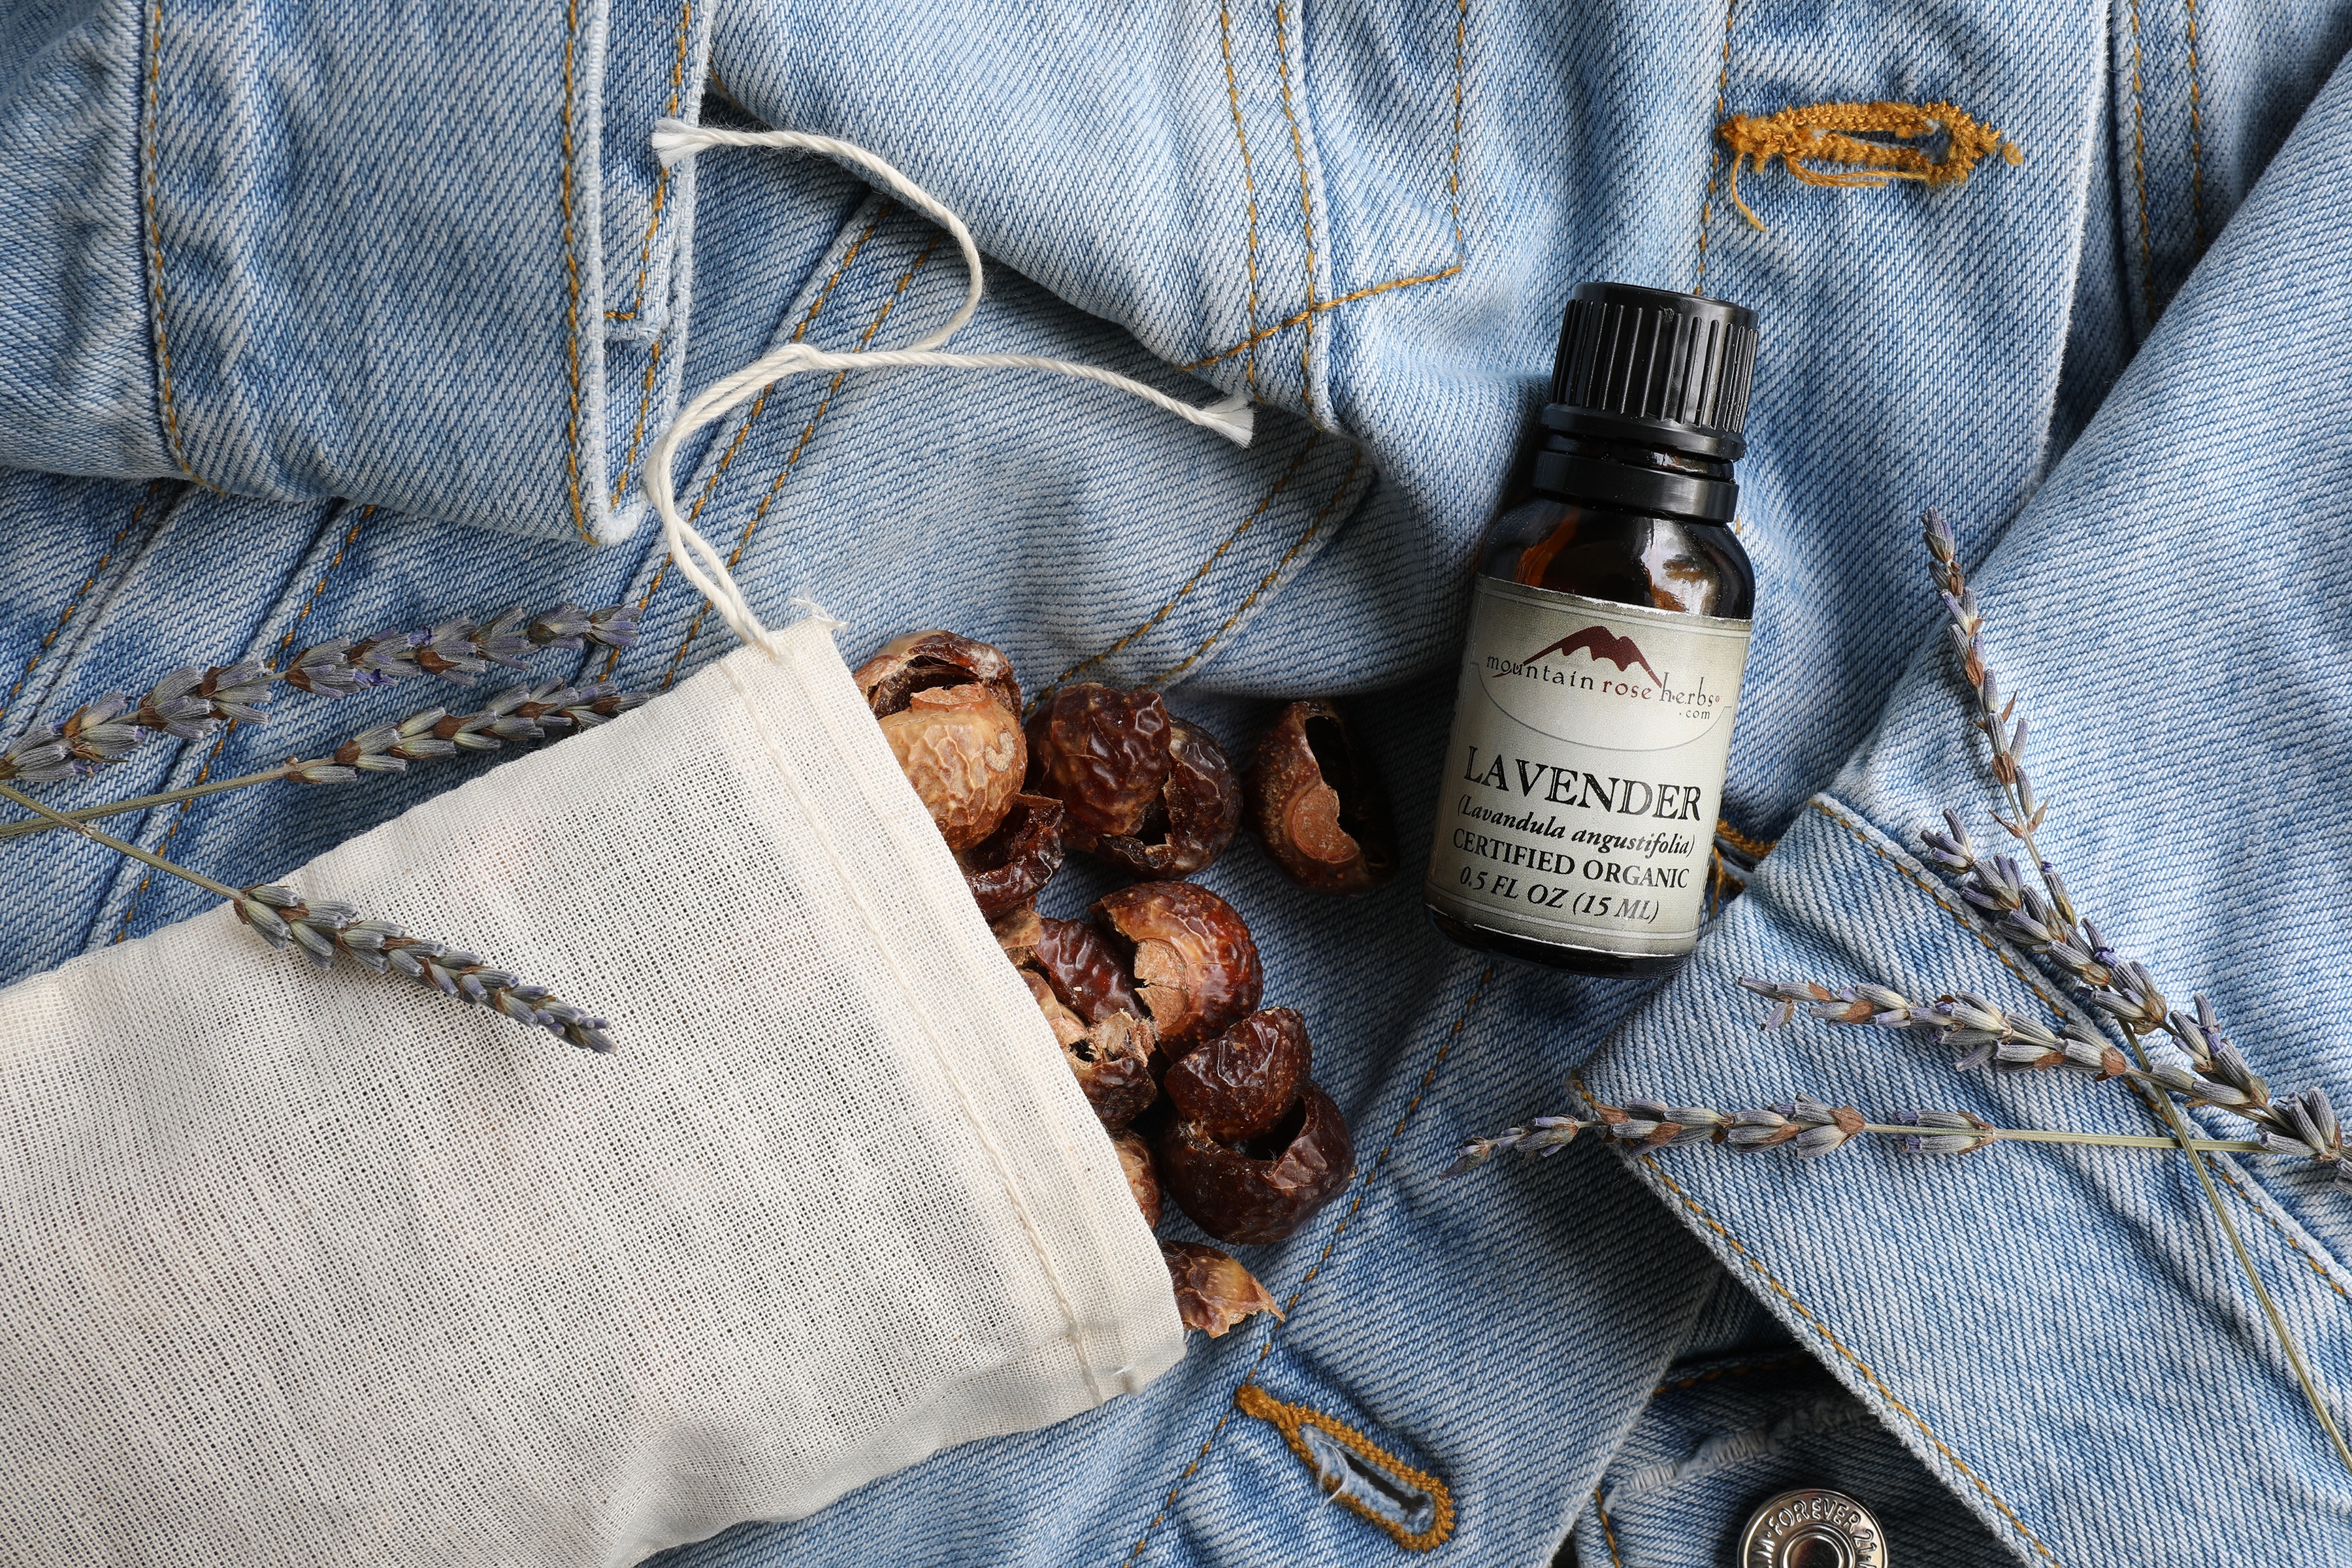 Soap nuts in muslin bag laying on jeans next to lavender essential oil and flowers